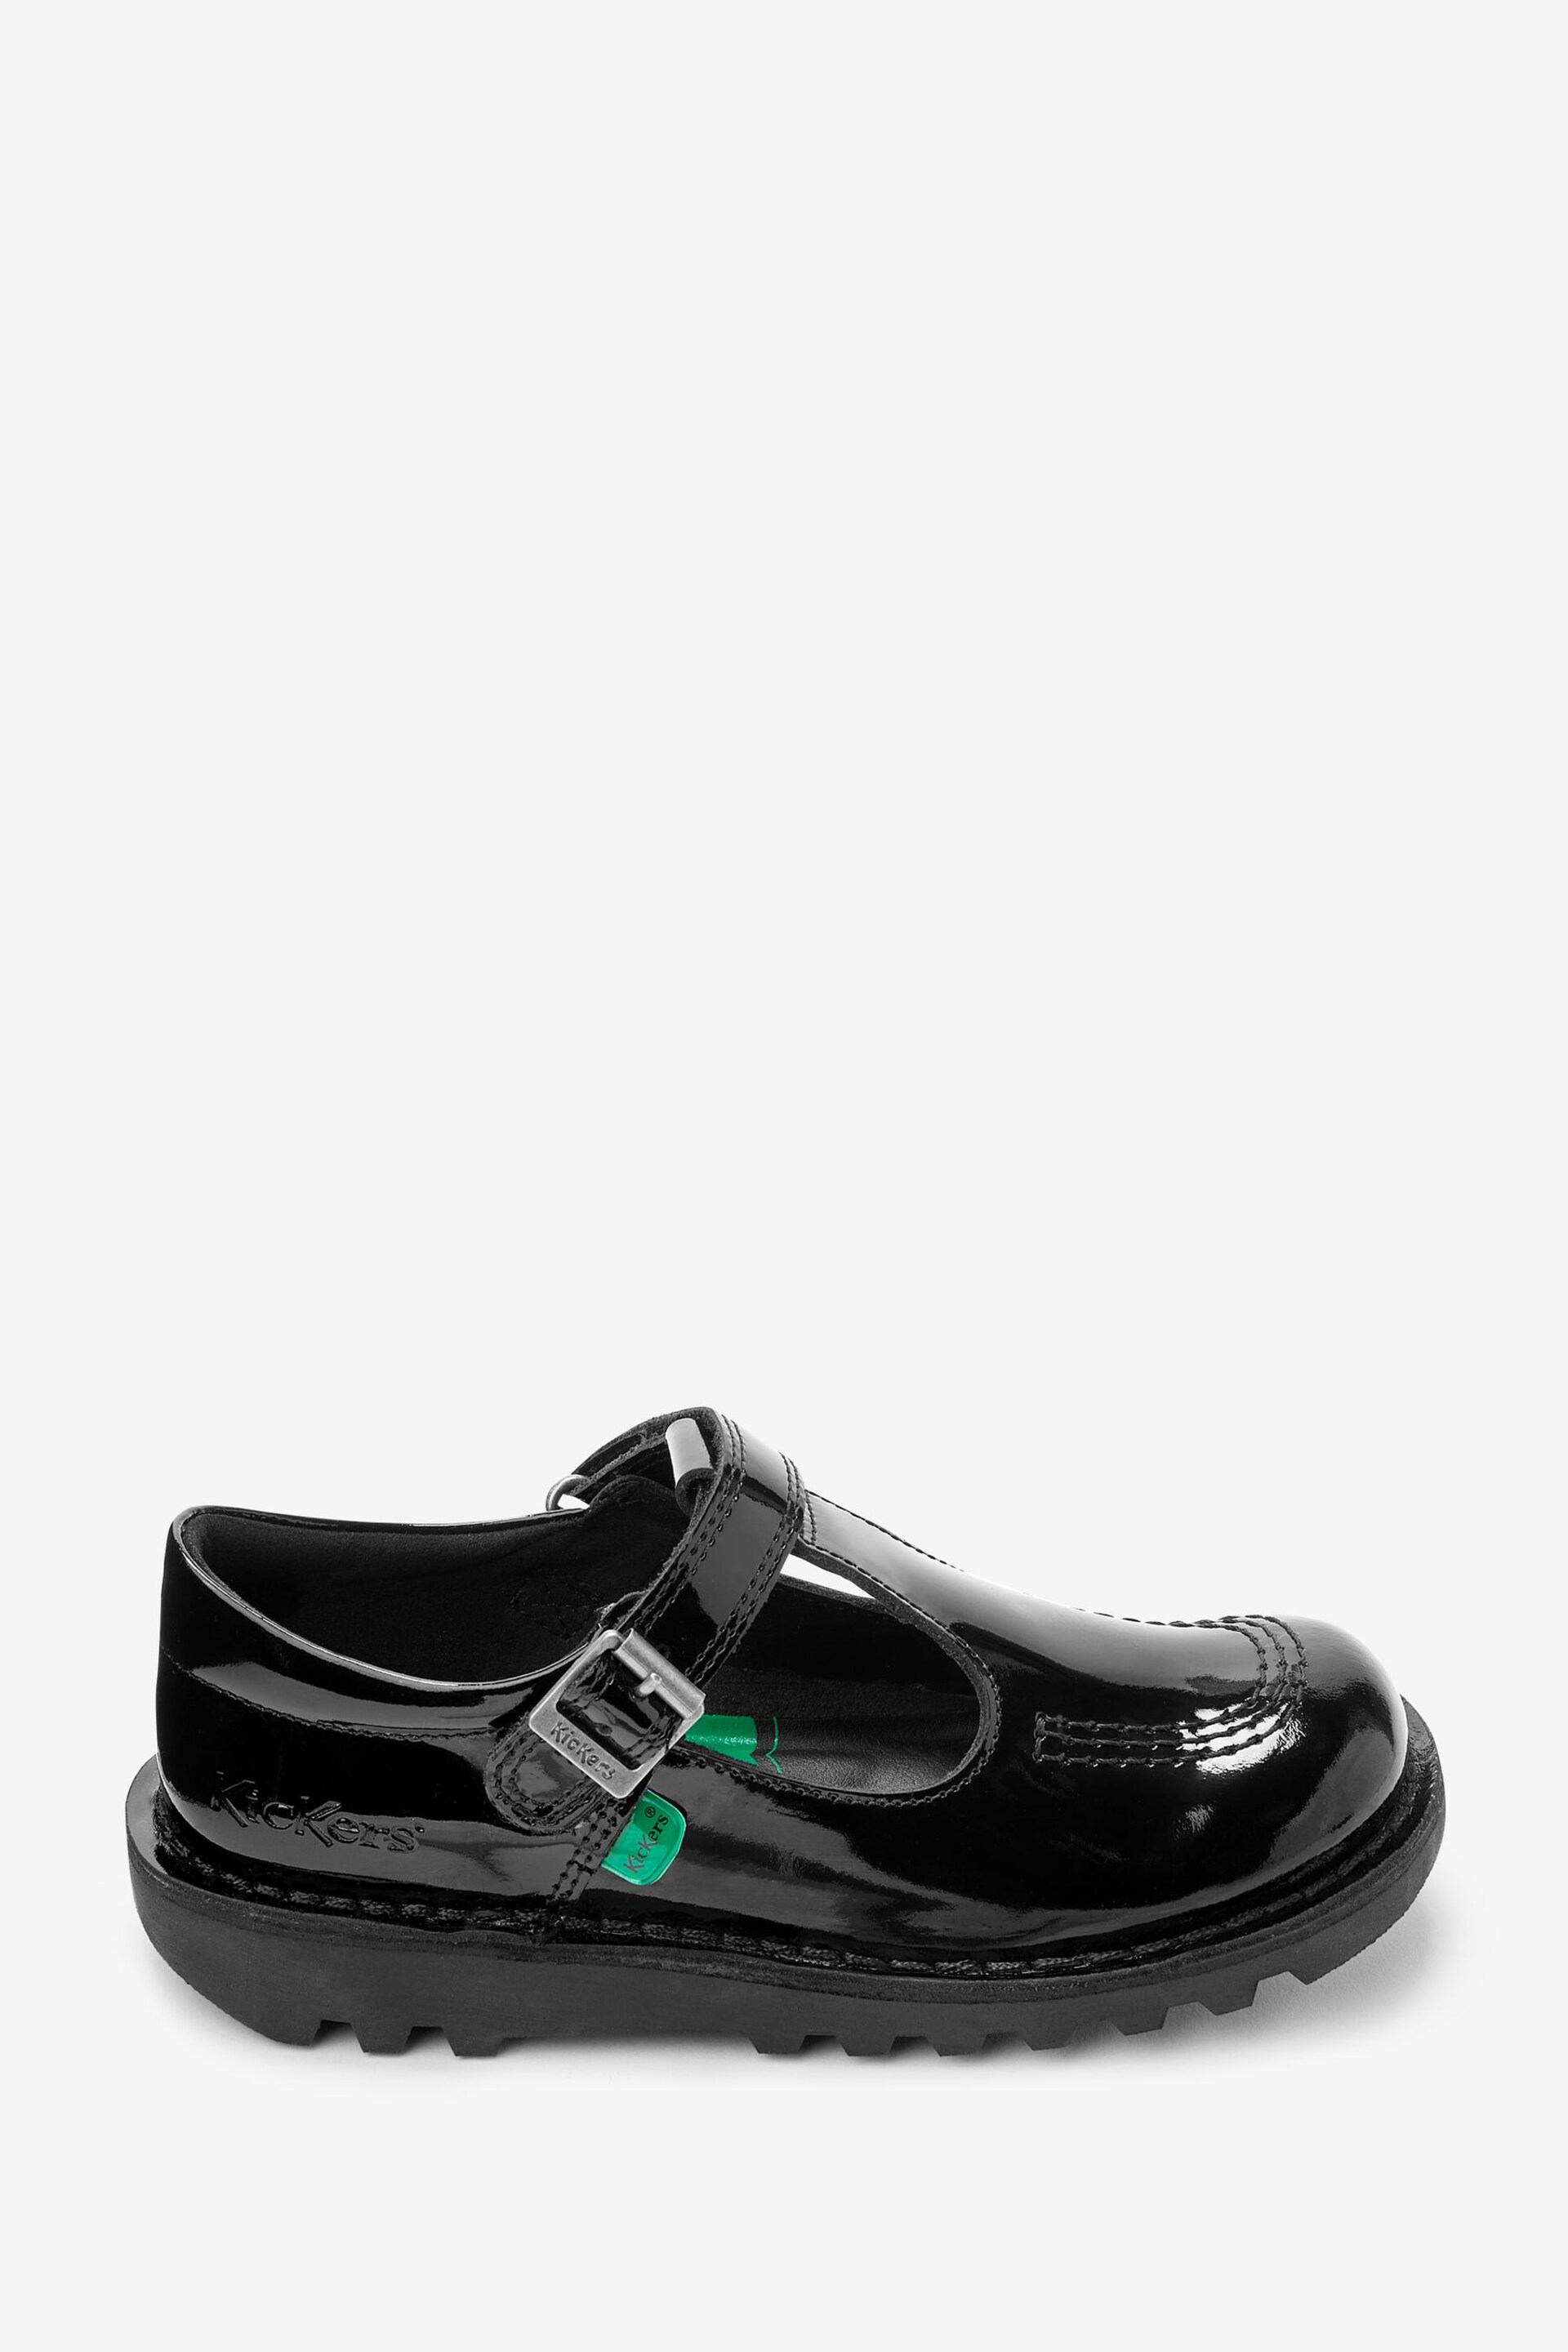 Kickers Junior Black Patent Leather Shoes - Image 1 of 1